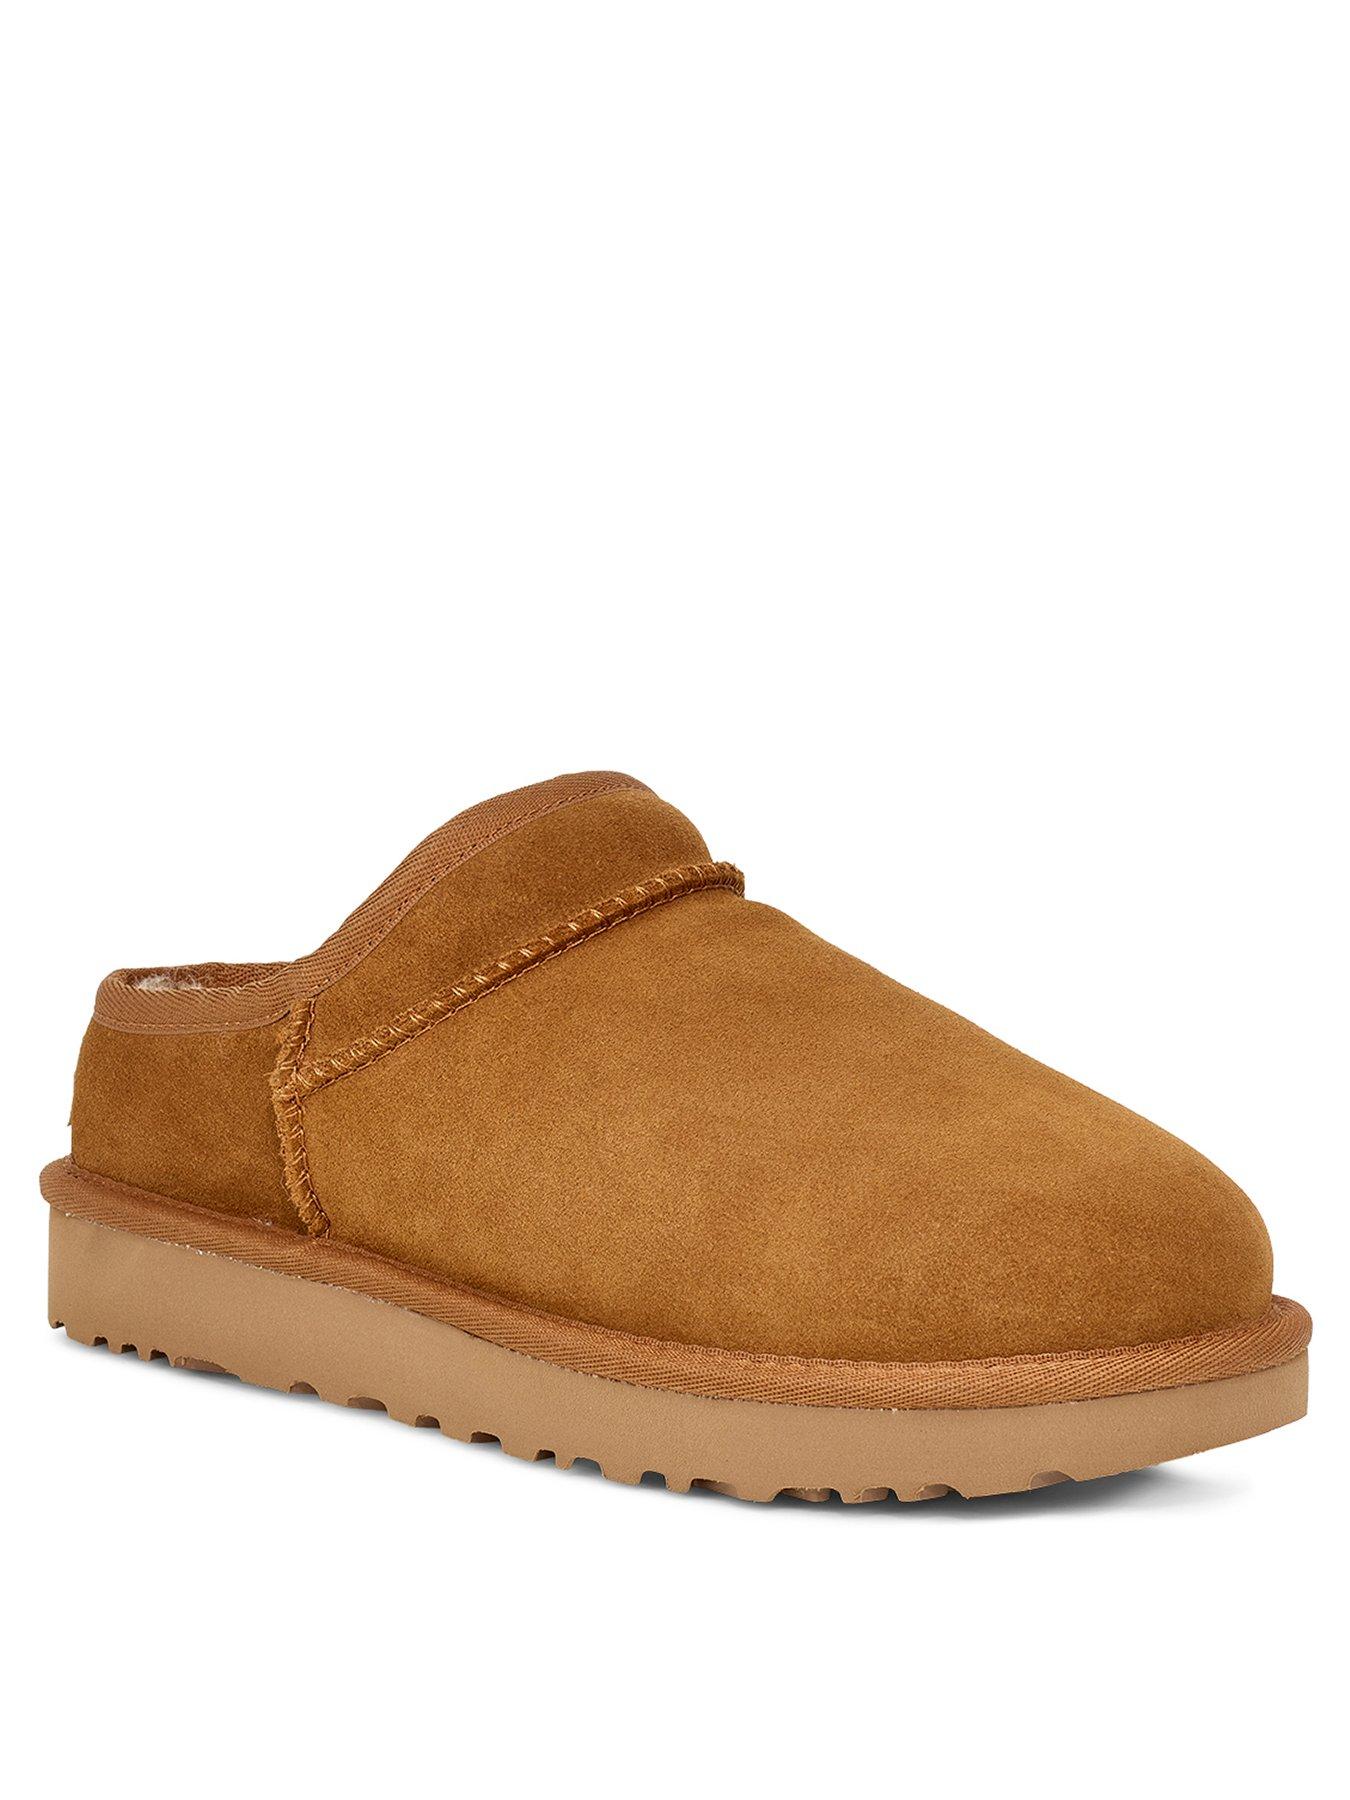 ugg slippers m and m direct